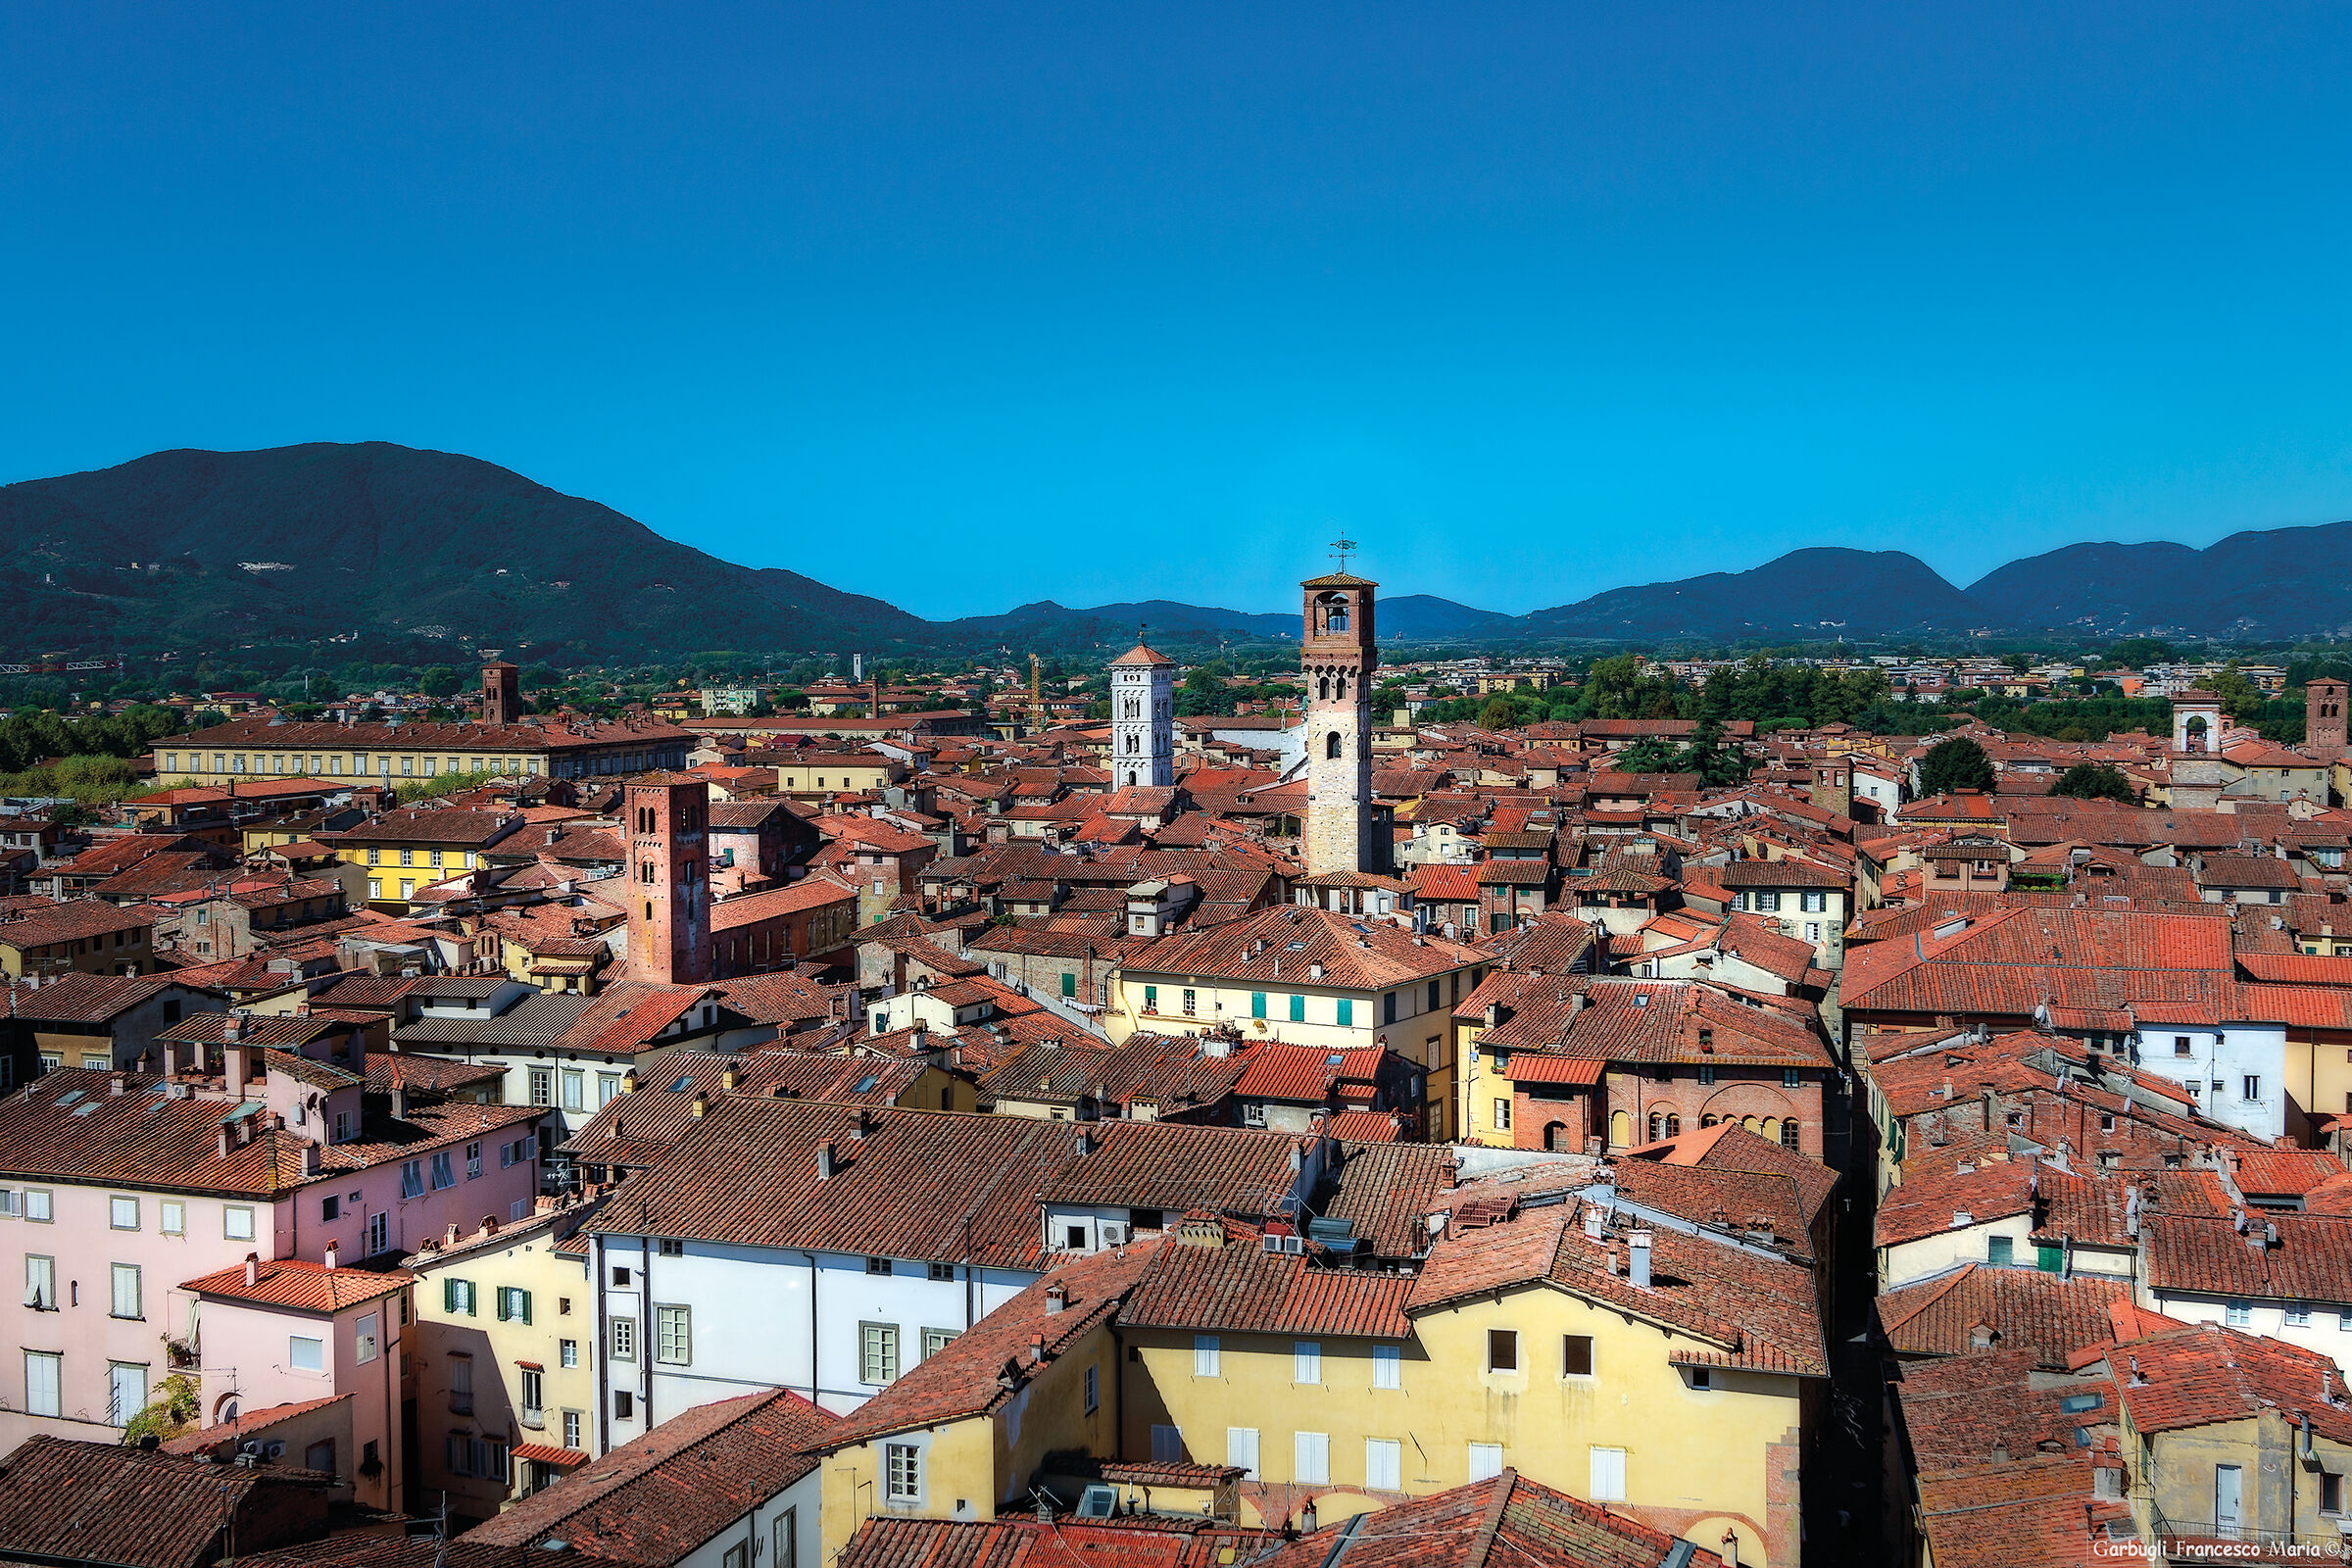 The rooftops of Lucca...